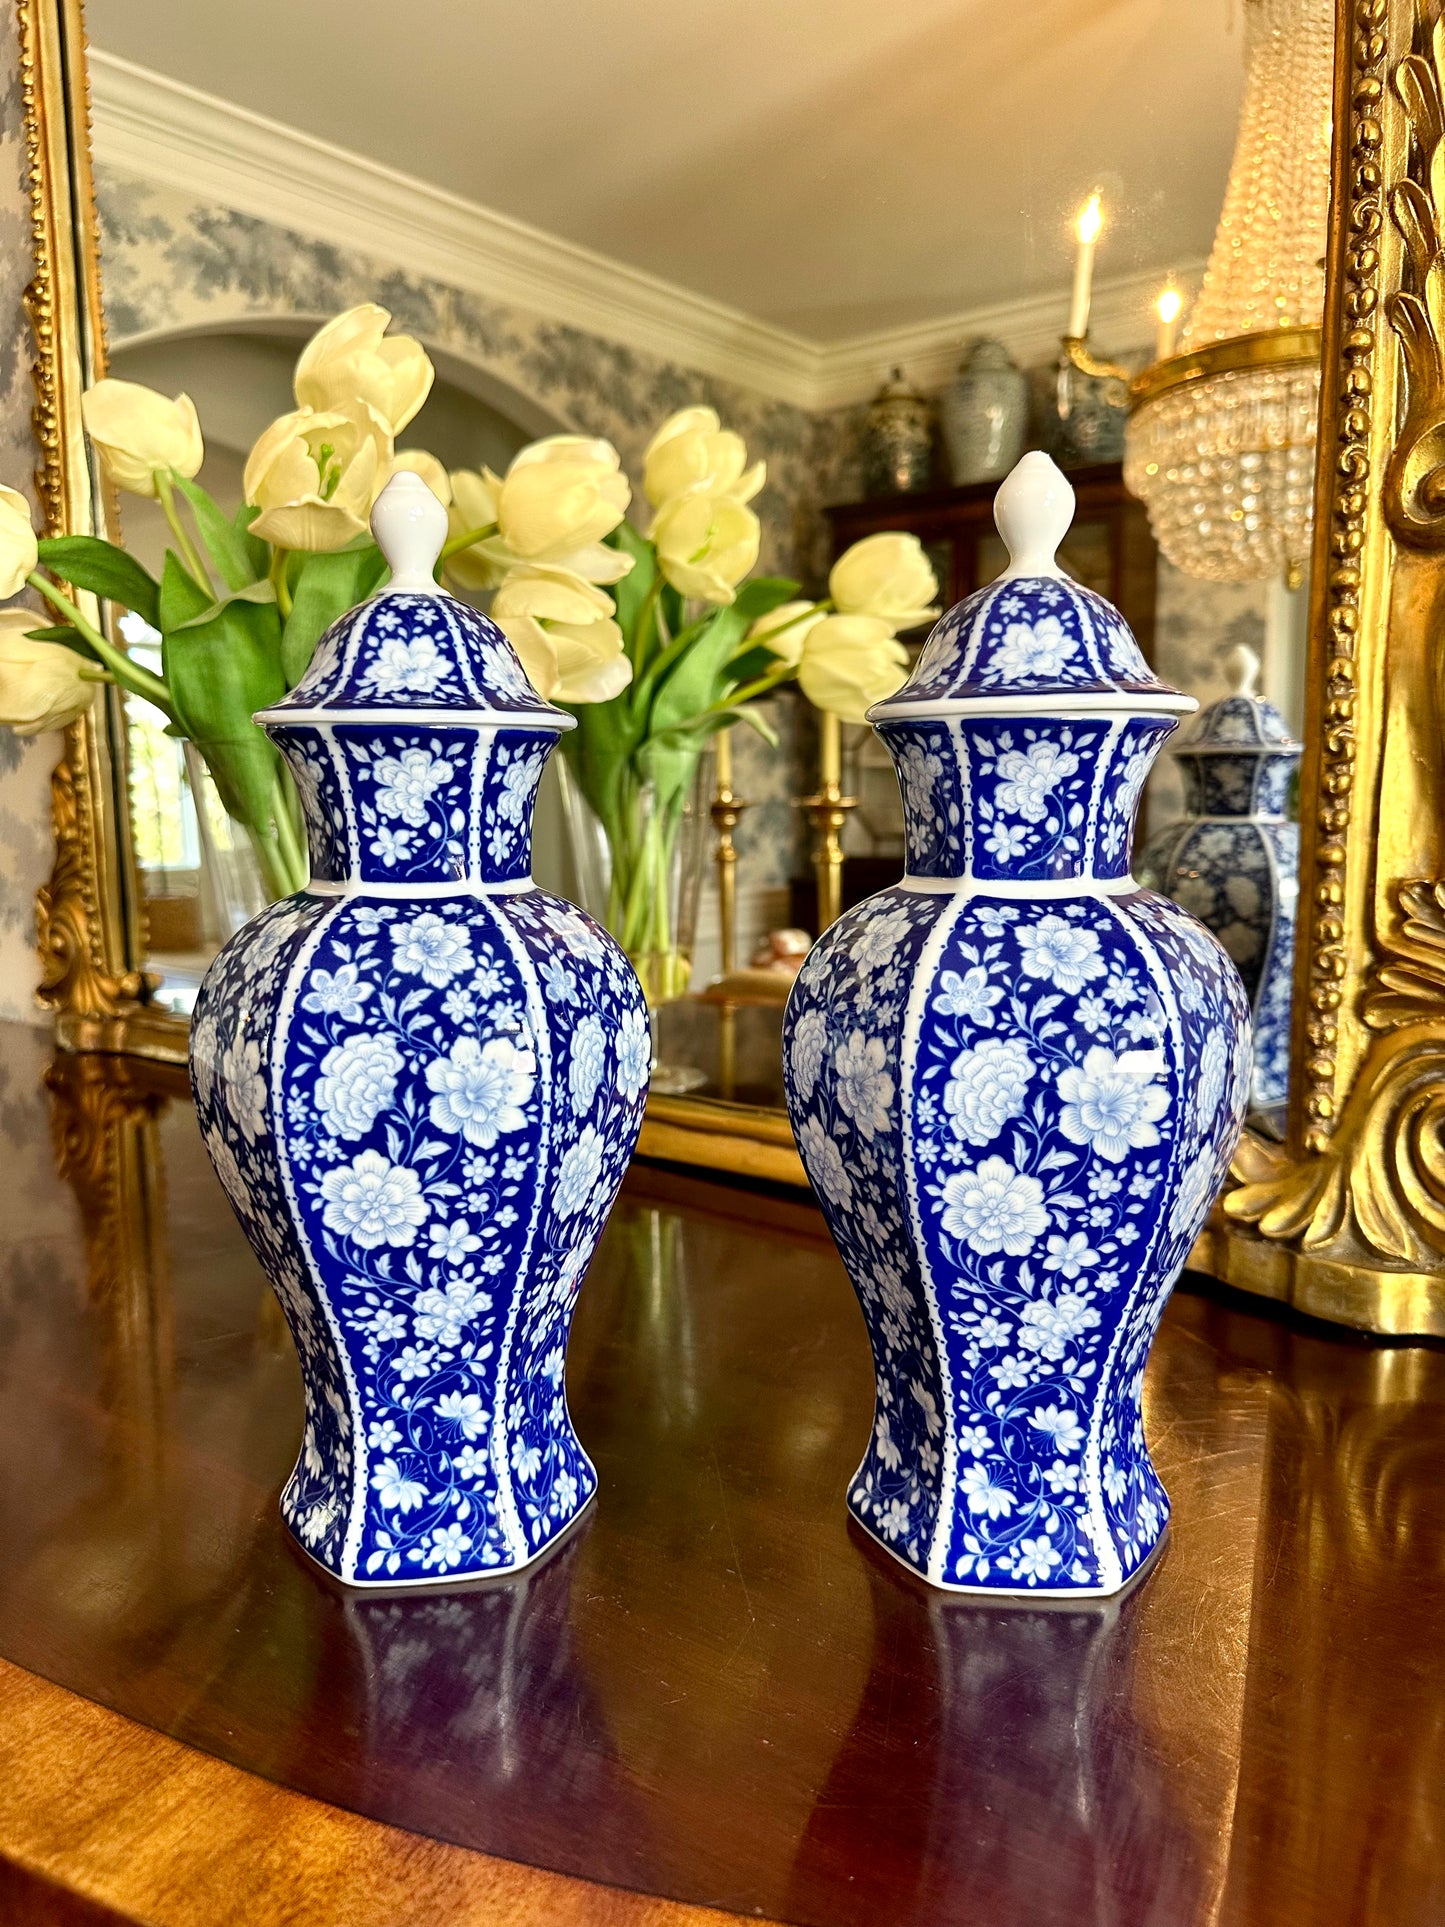 Beautiful German Pair of Blue & White Floral Porcelain Urns, 12.5” high x 5.5” wide - Pristine!